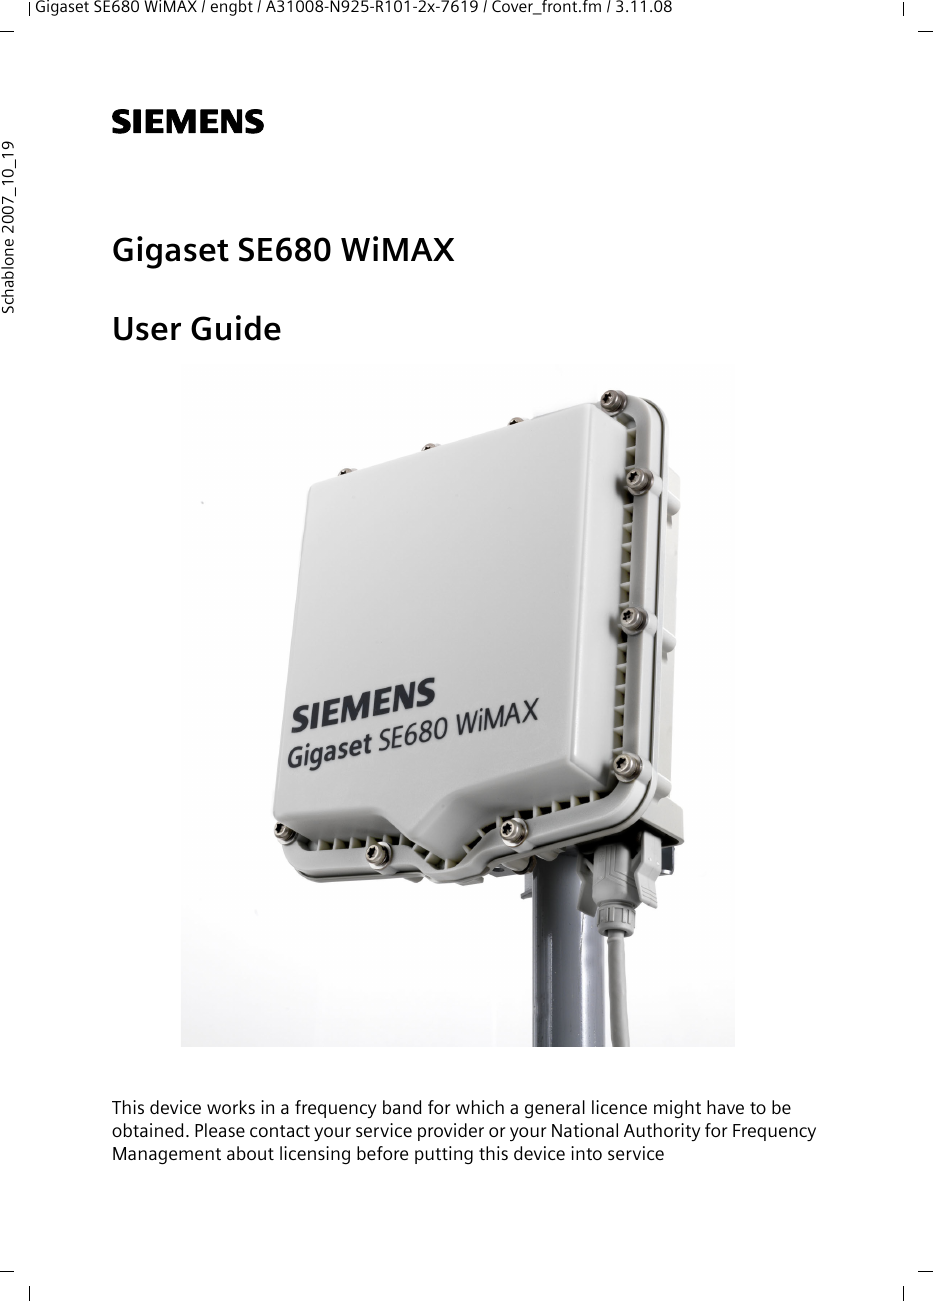 Gigaset SE680 WiMAX / engbt / A31008-N925-R101-2x-7619 / Cover_front.fm / 3.11.08Schablone 2007_10_19s Gigaset SE680 WiMAXUser GuideThis device works in a frequency band for which a general licence might have to be obtained. Please contact your service provider or your National Authority for Frequency Management about licensing before putting this device into service